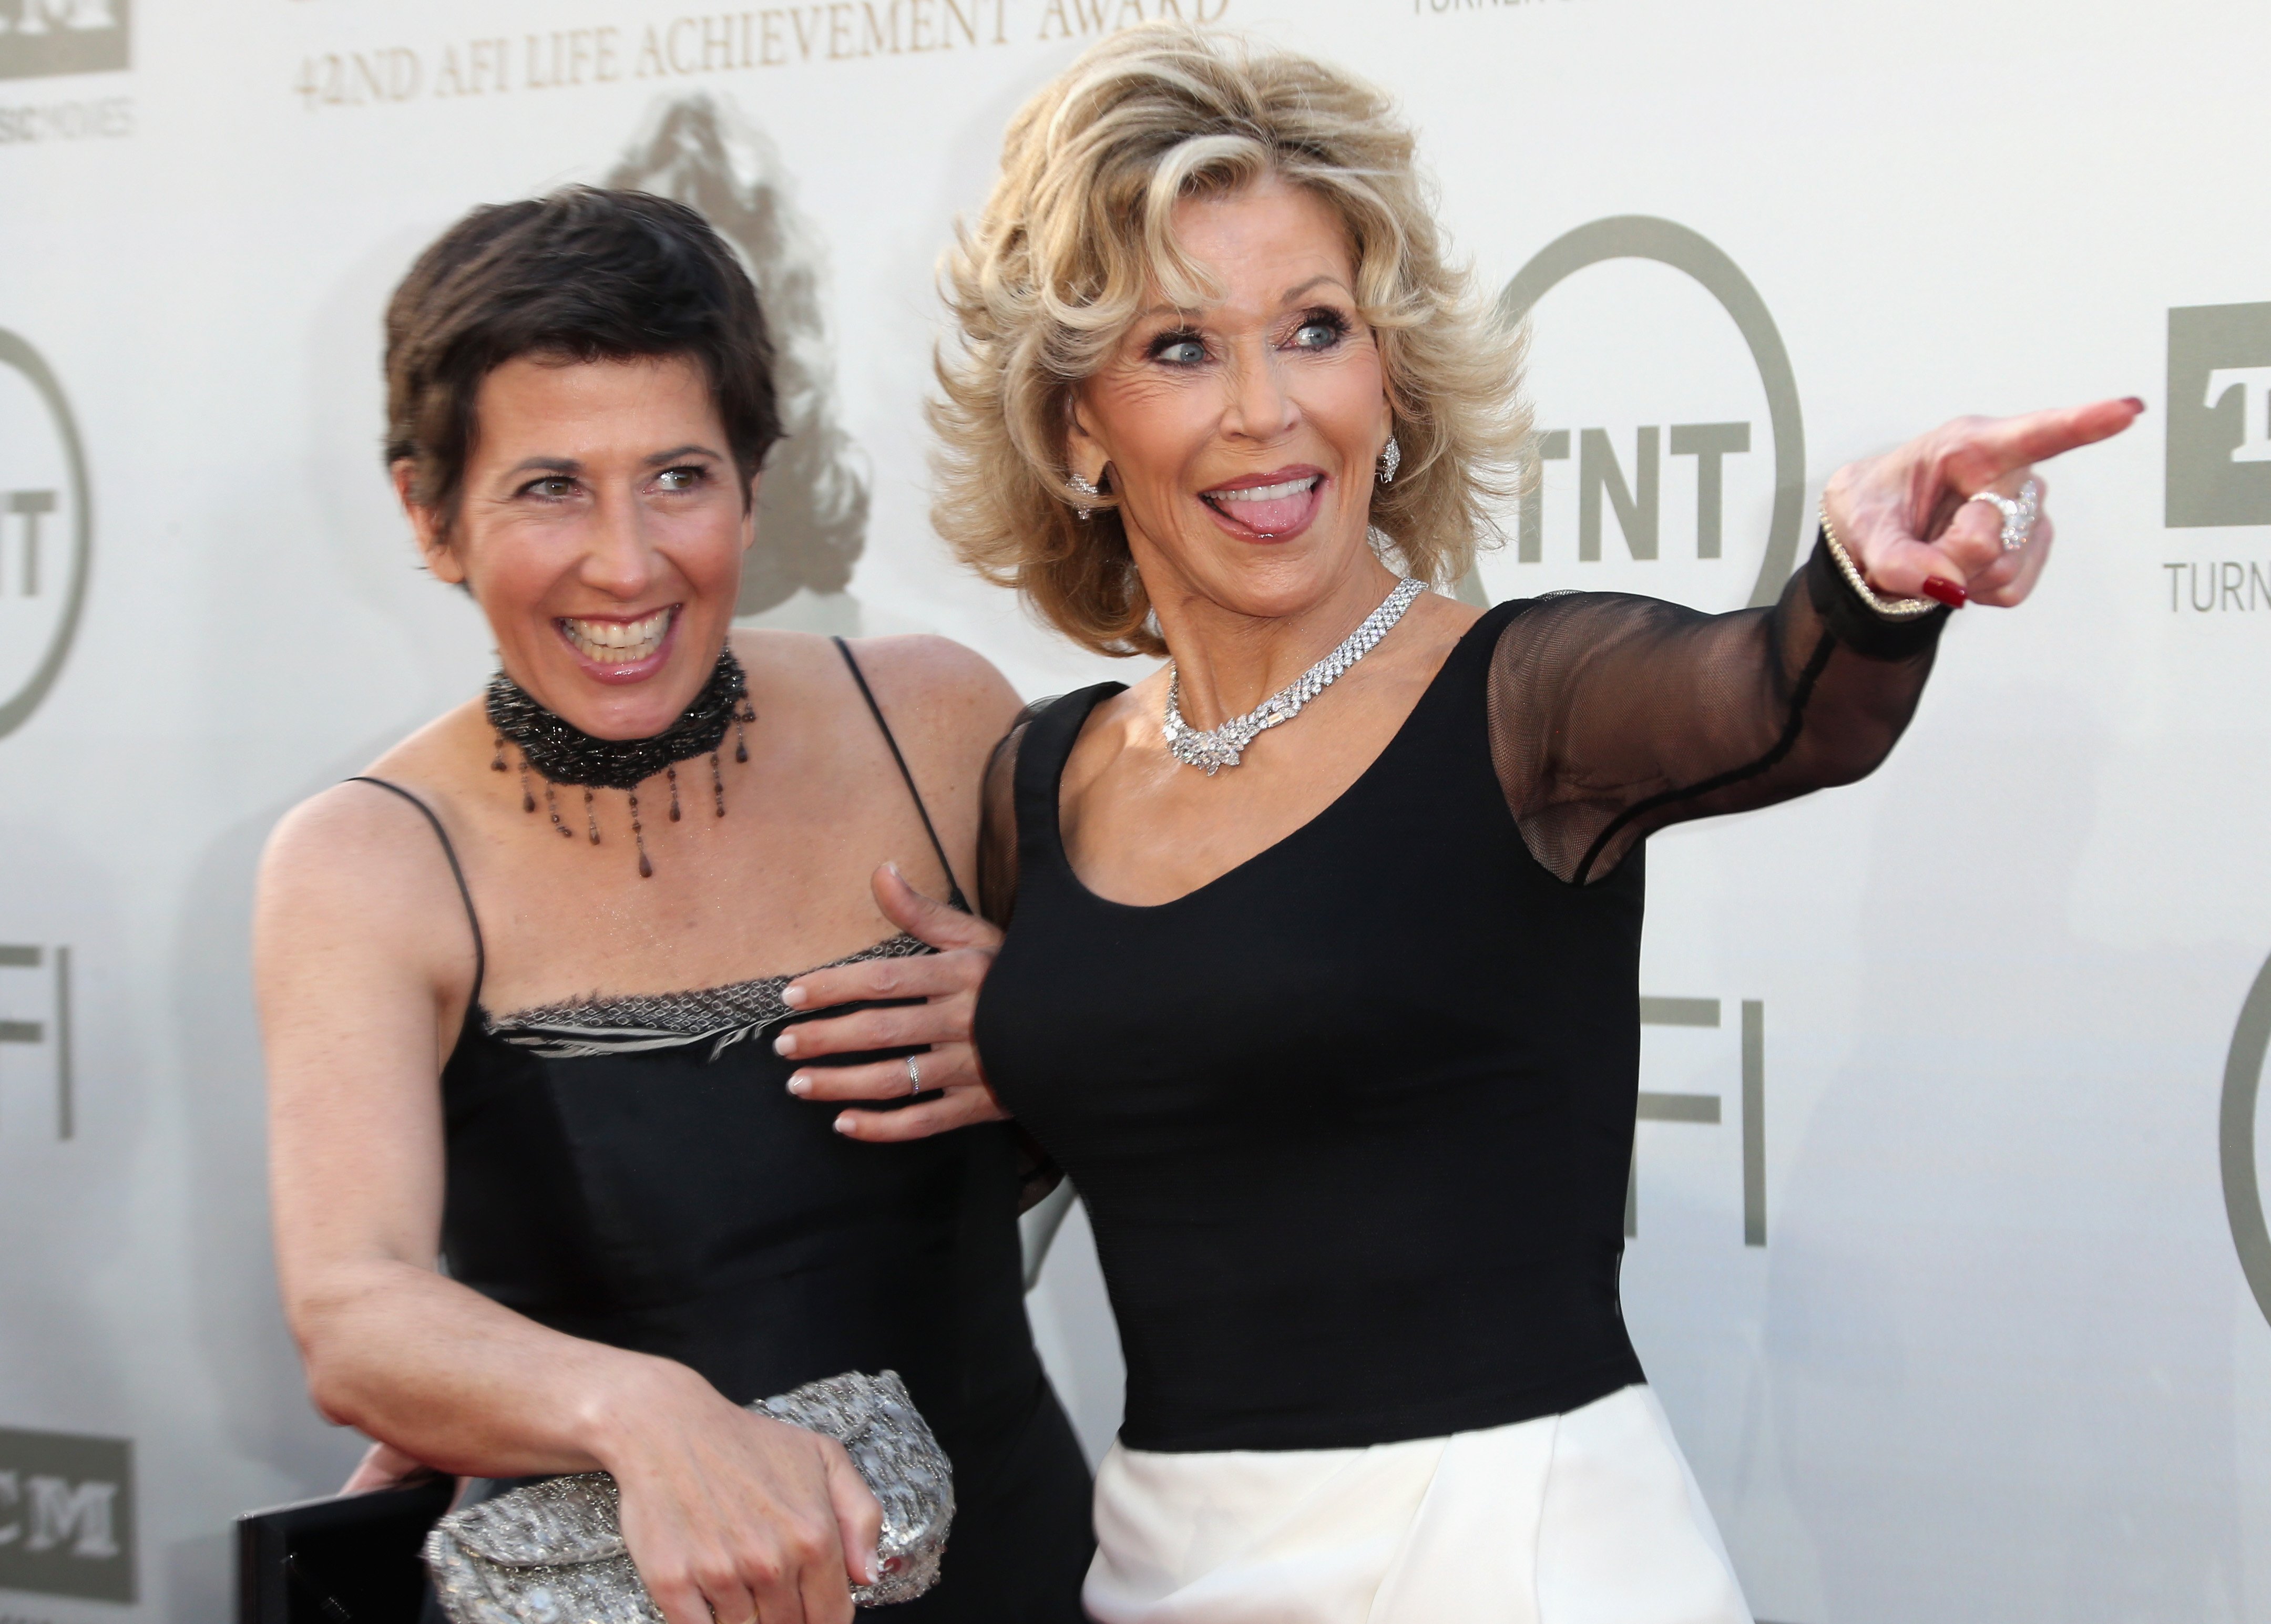 Vanessa Vadim and Honoree Jane Fonda attend the 2014 AFI Life Achievement Award: A Tribute to Jane Fonda at the Dolby Theatre on June 5, 2014 in Hollywood, California | Source: Getty Images 